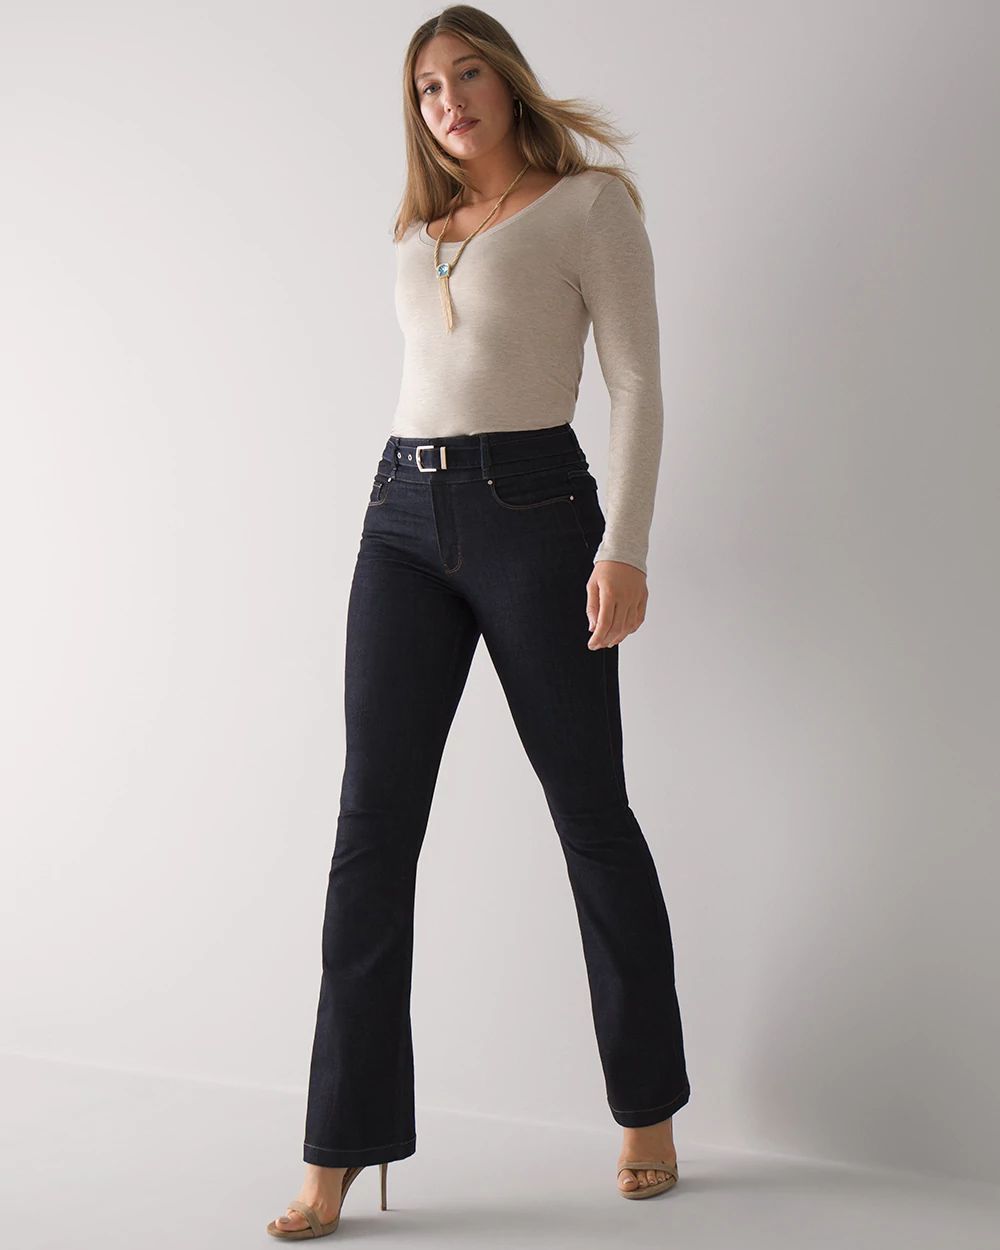 Curvy-Fit High-Rise Sculpt Skinny Flare Jeans click to view larger image.